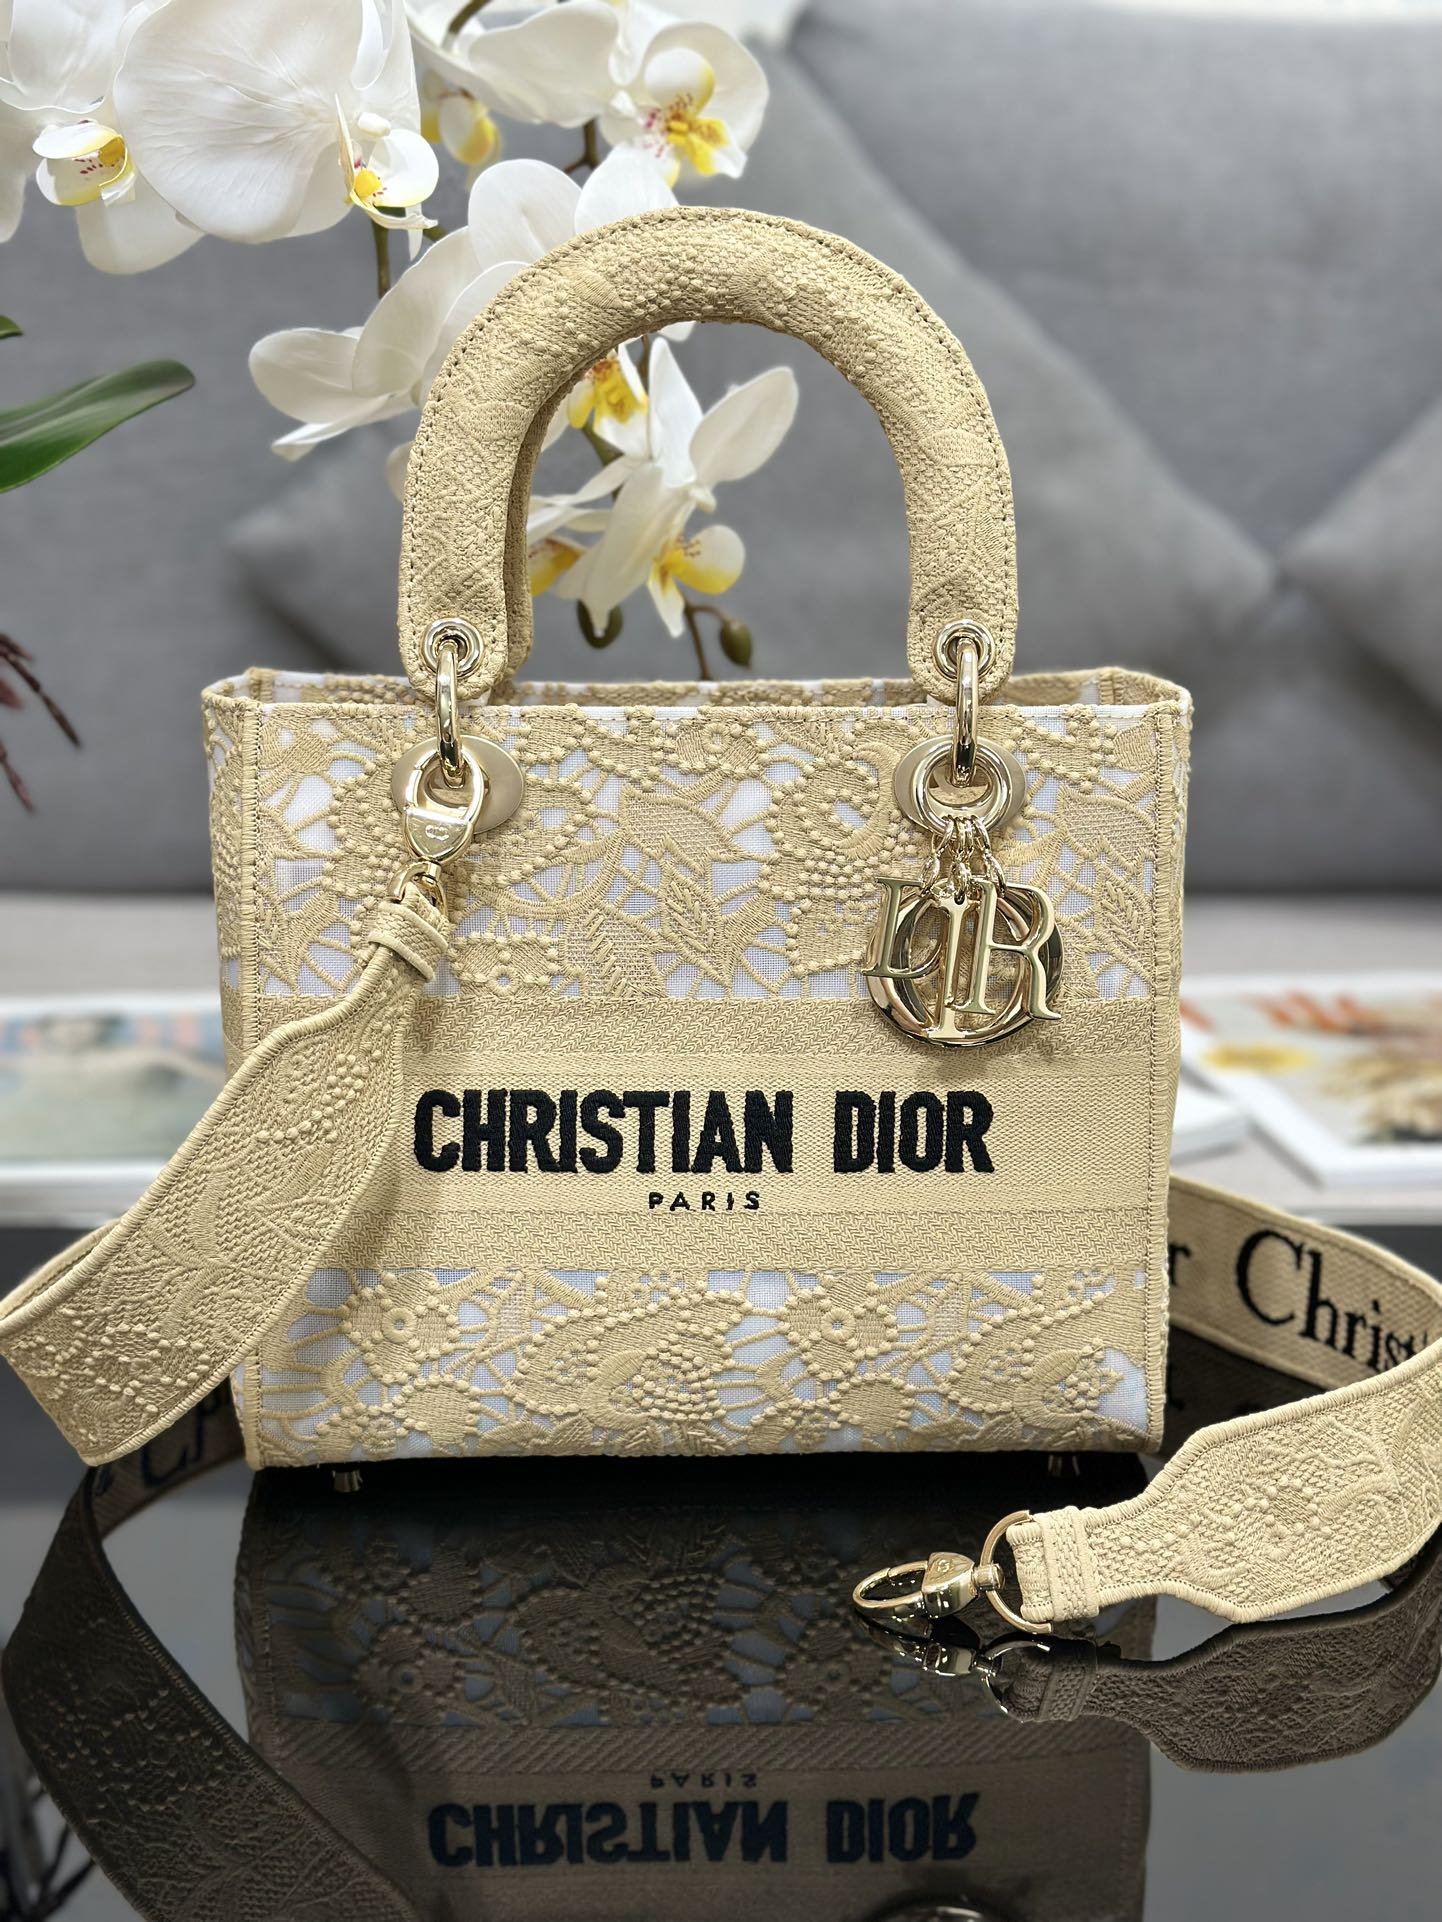 Dior Bags Handbags Apricot Color Gold Embroidery Lace Lady